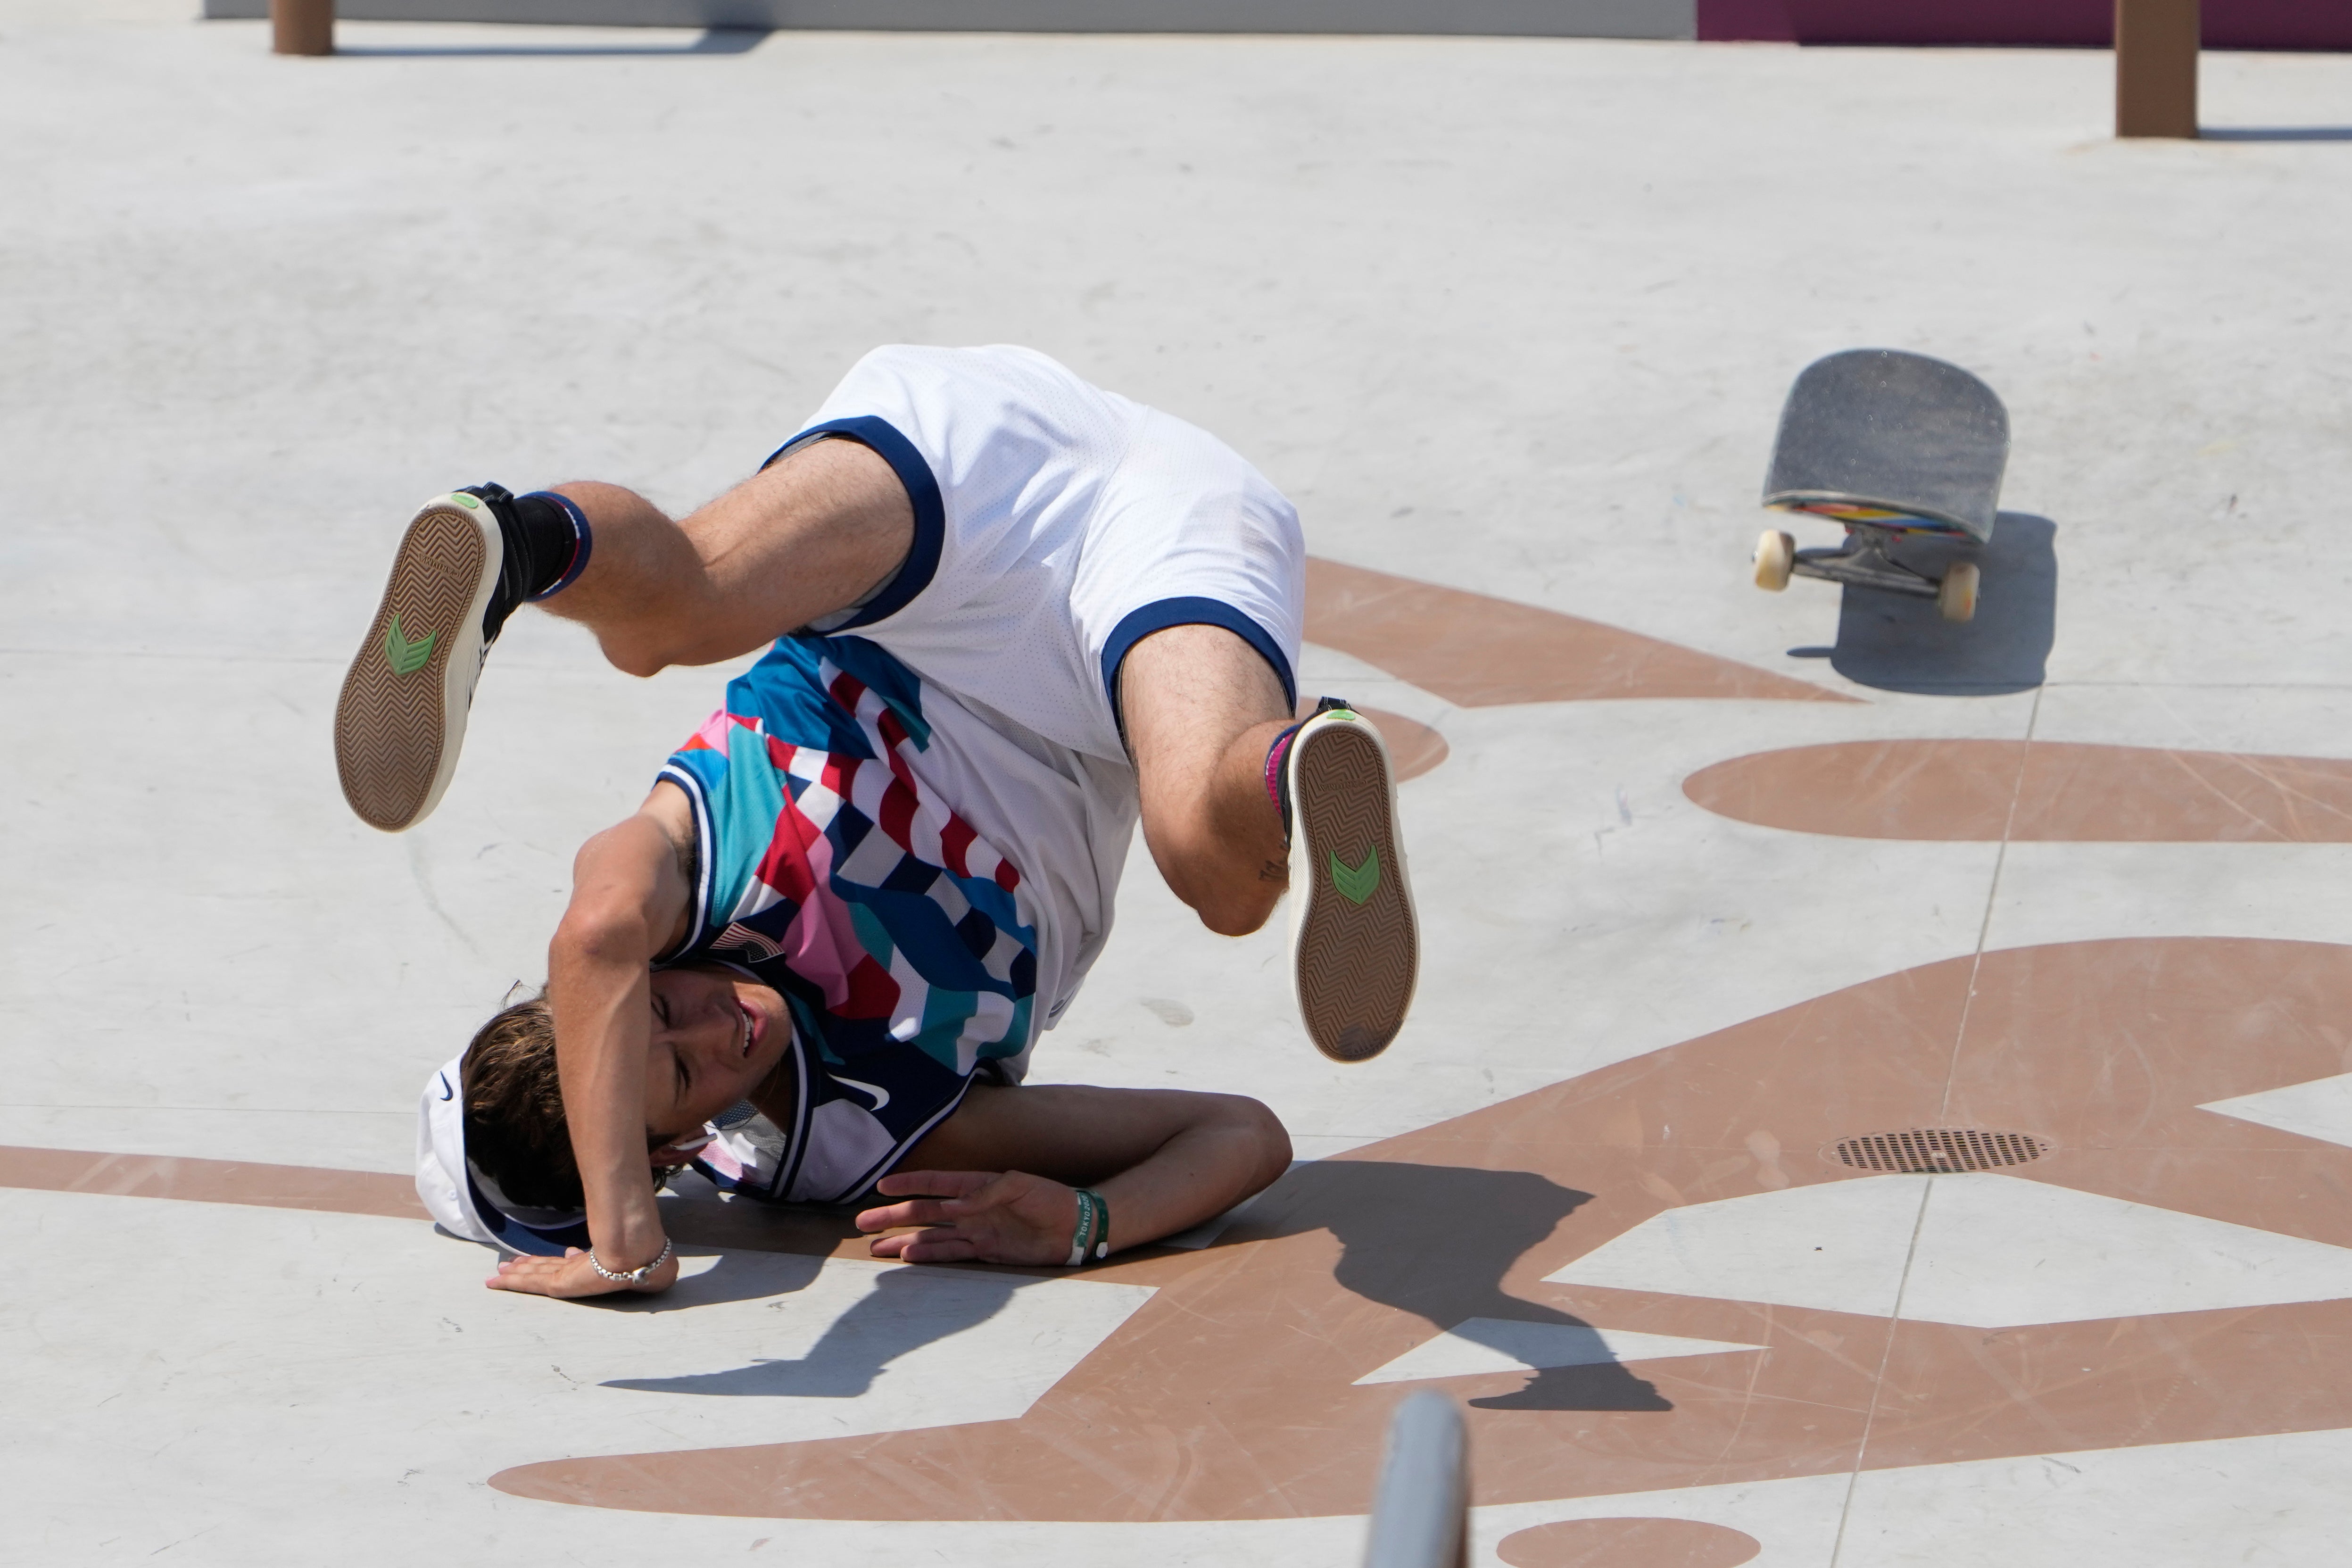 Jagger Eaton of the United States takes a tumble during the men’s street skateboarding final in Tokyo (Jae C. Hong/AP/PA)